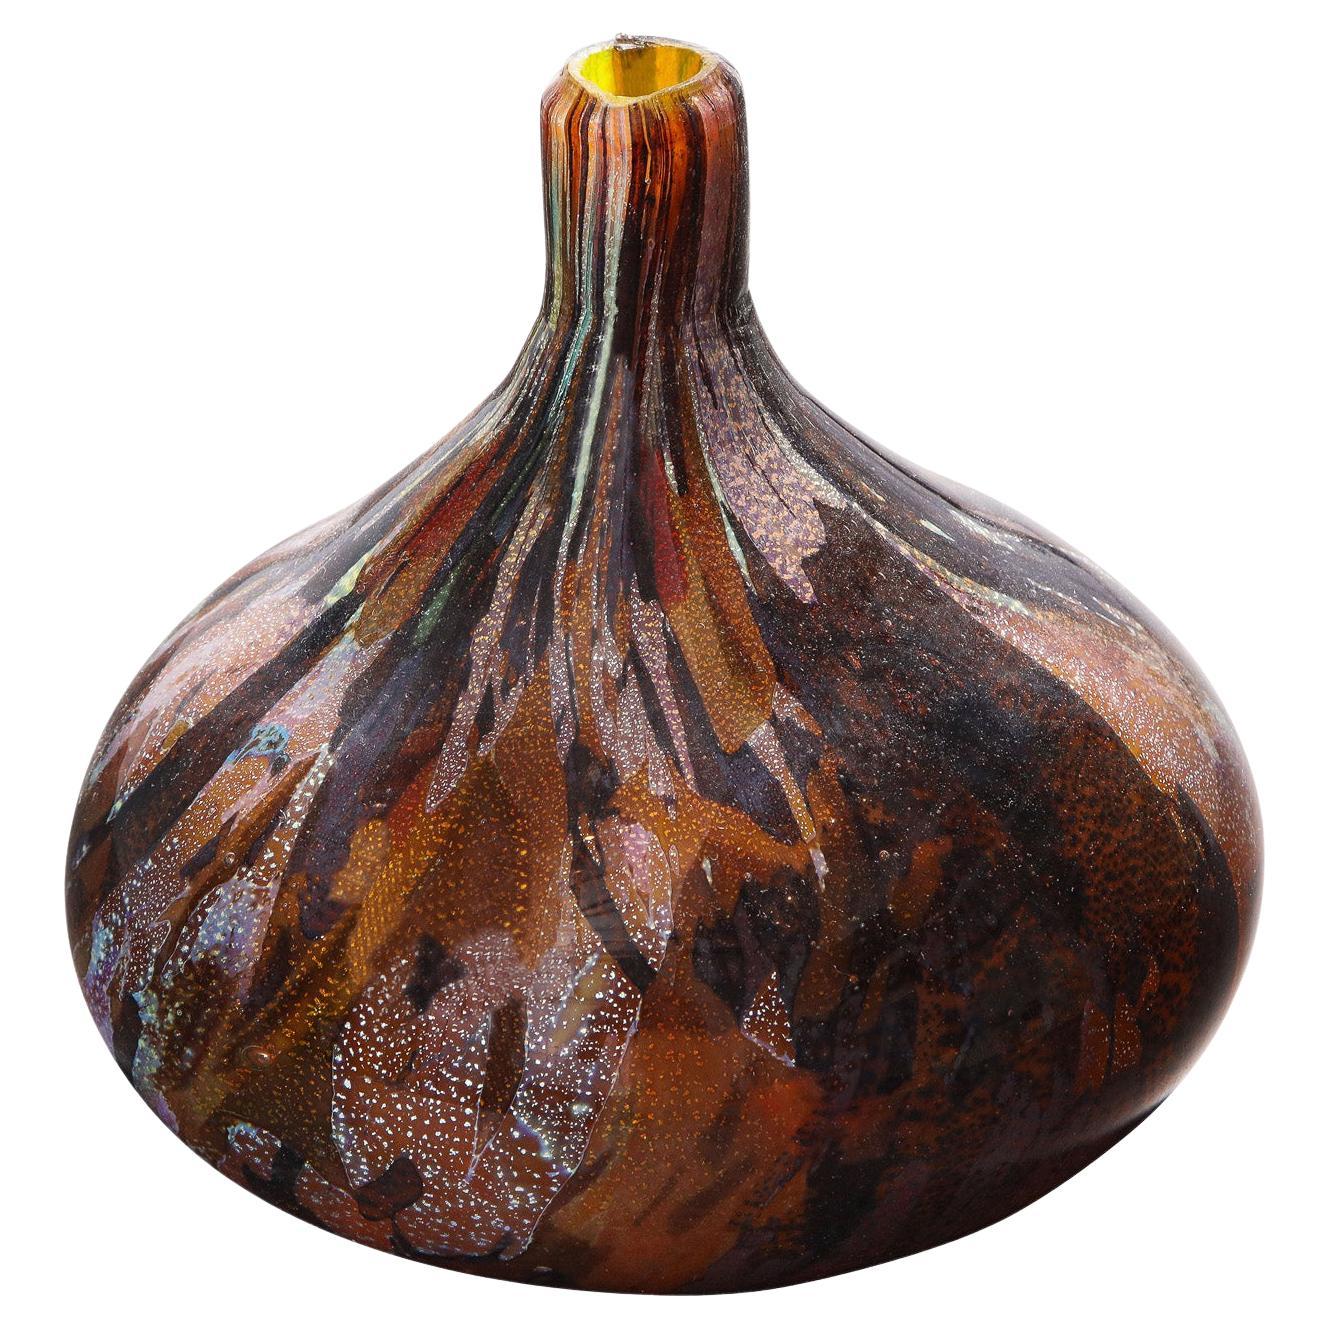 Also Nason Handblown Glass Vase with Silver and Gold Foil, 1960s